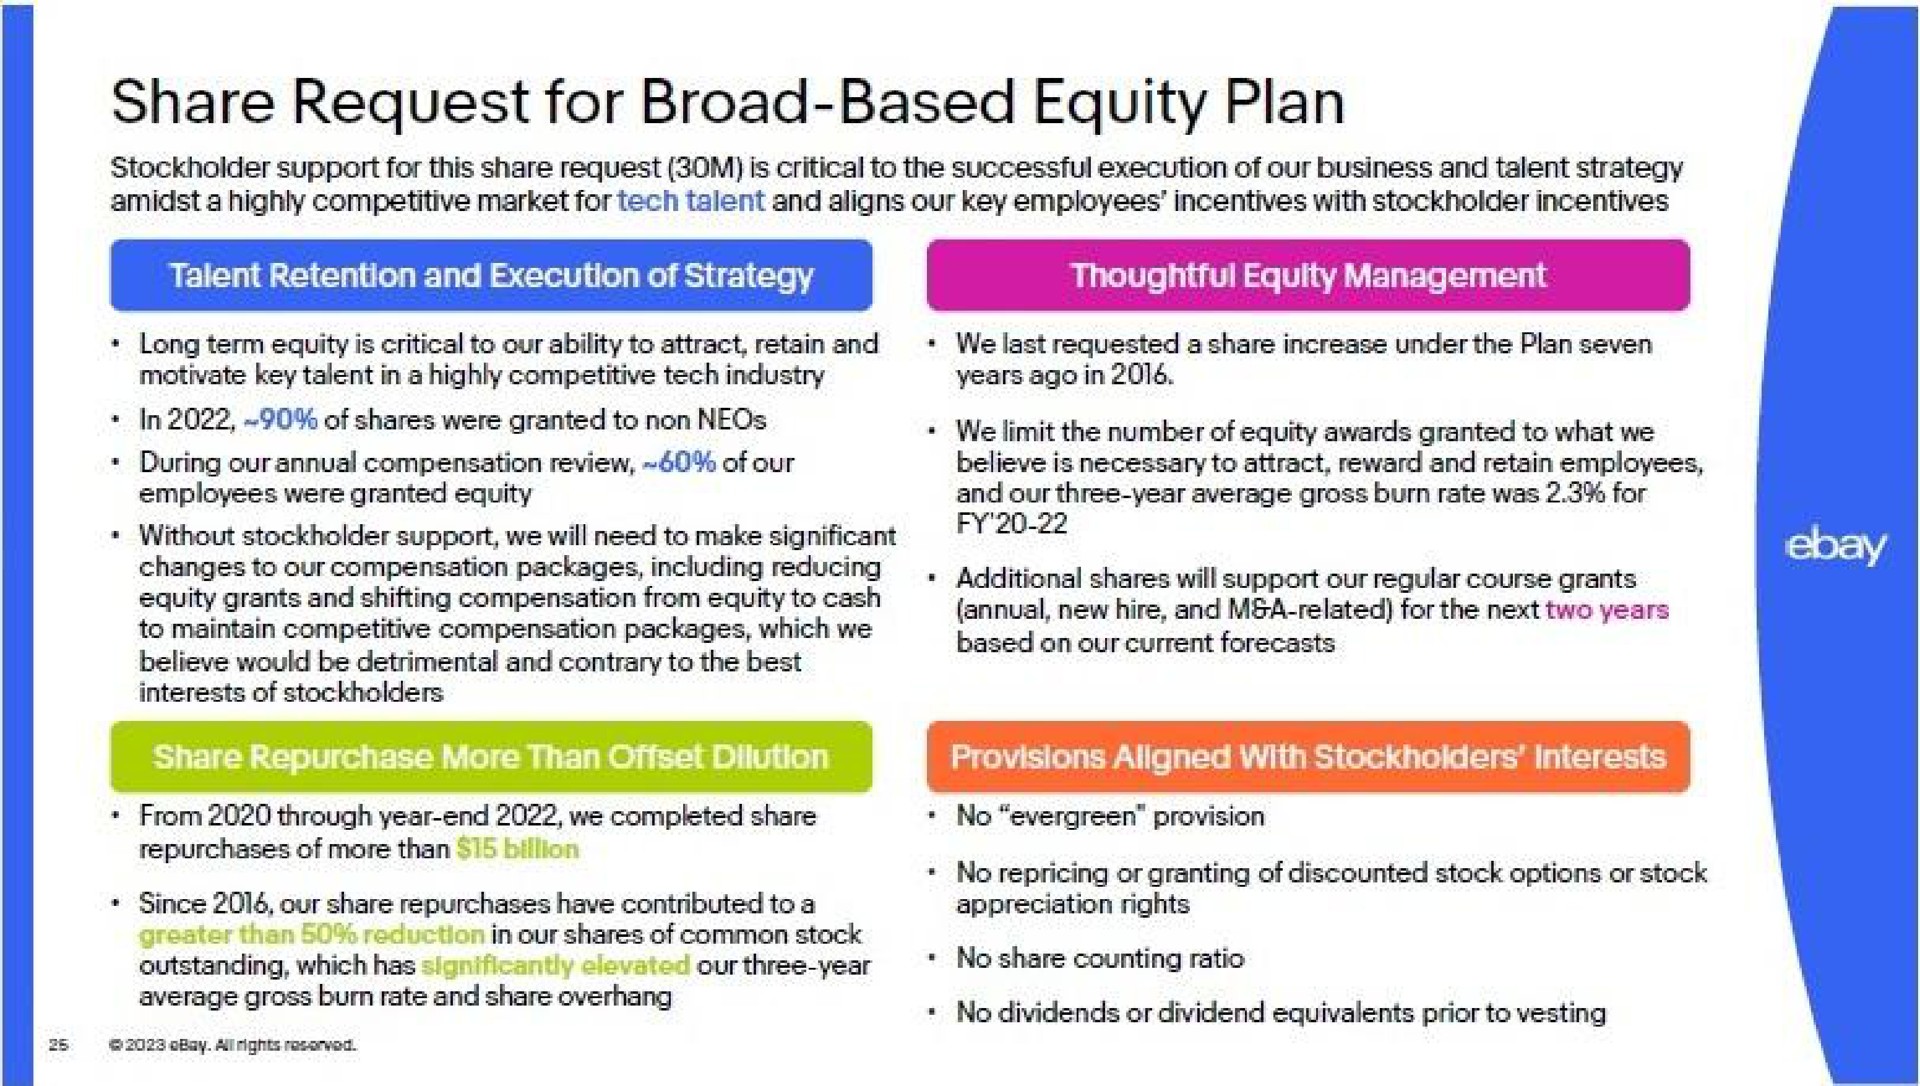 share request for broad based equity plan | eBay